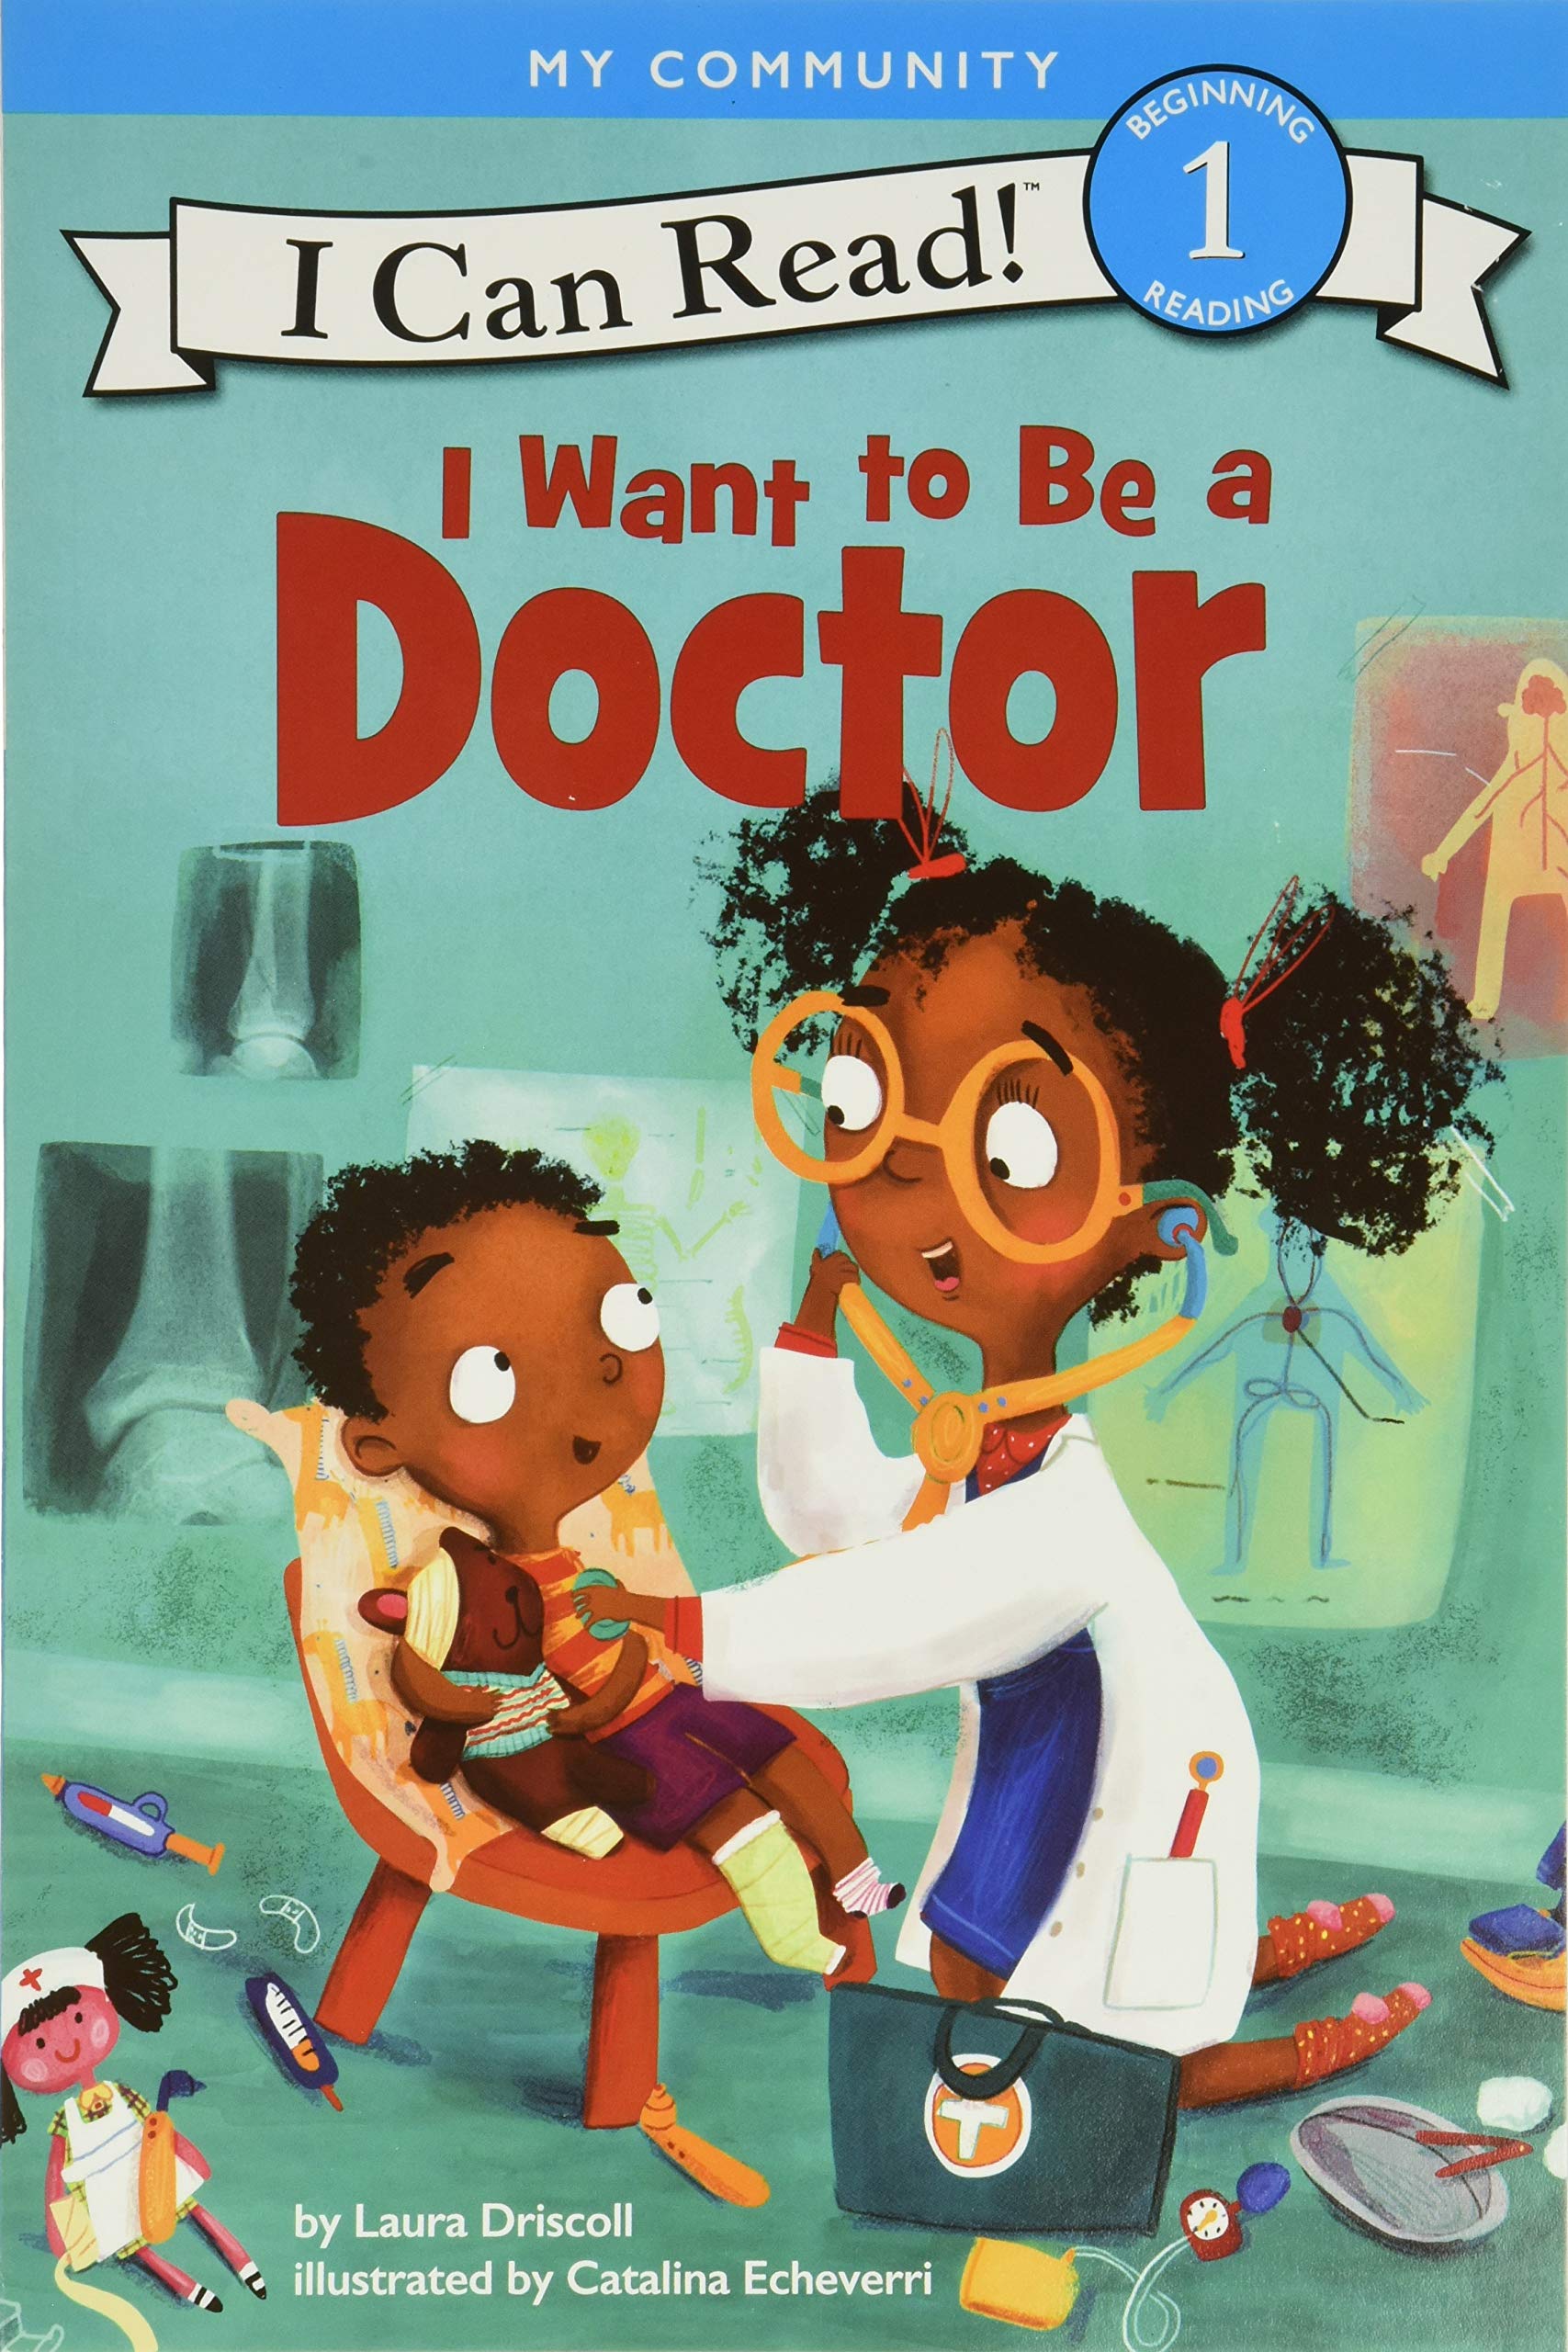 I Want to Be a Doctor by Laura Driscoll